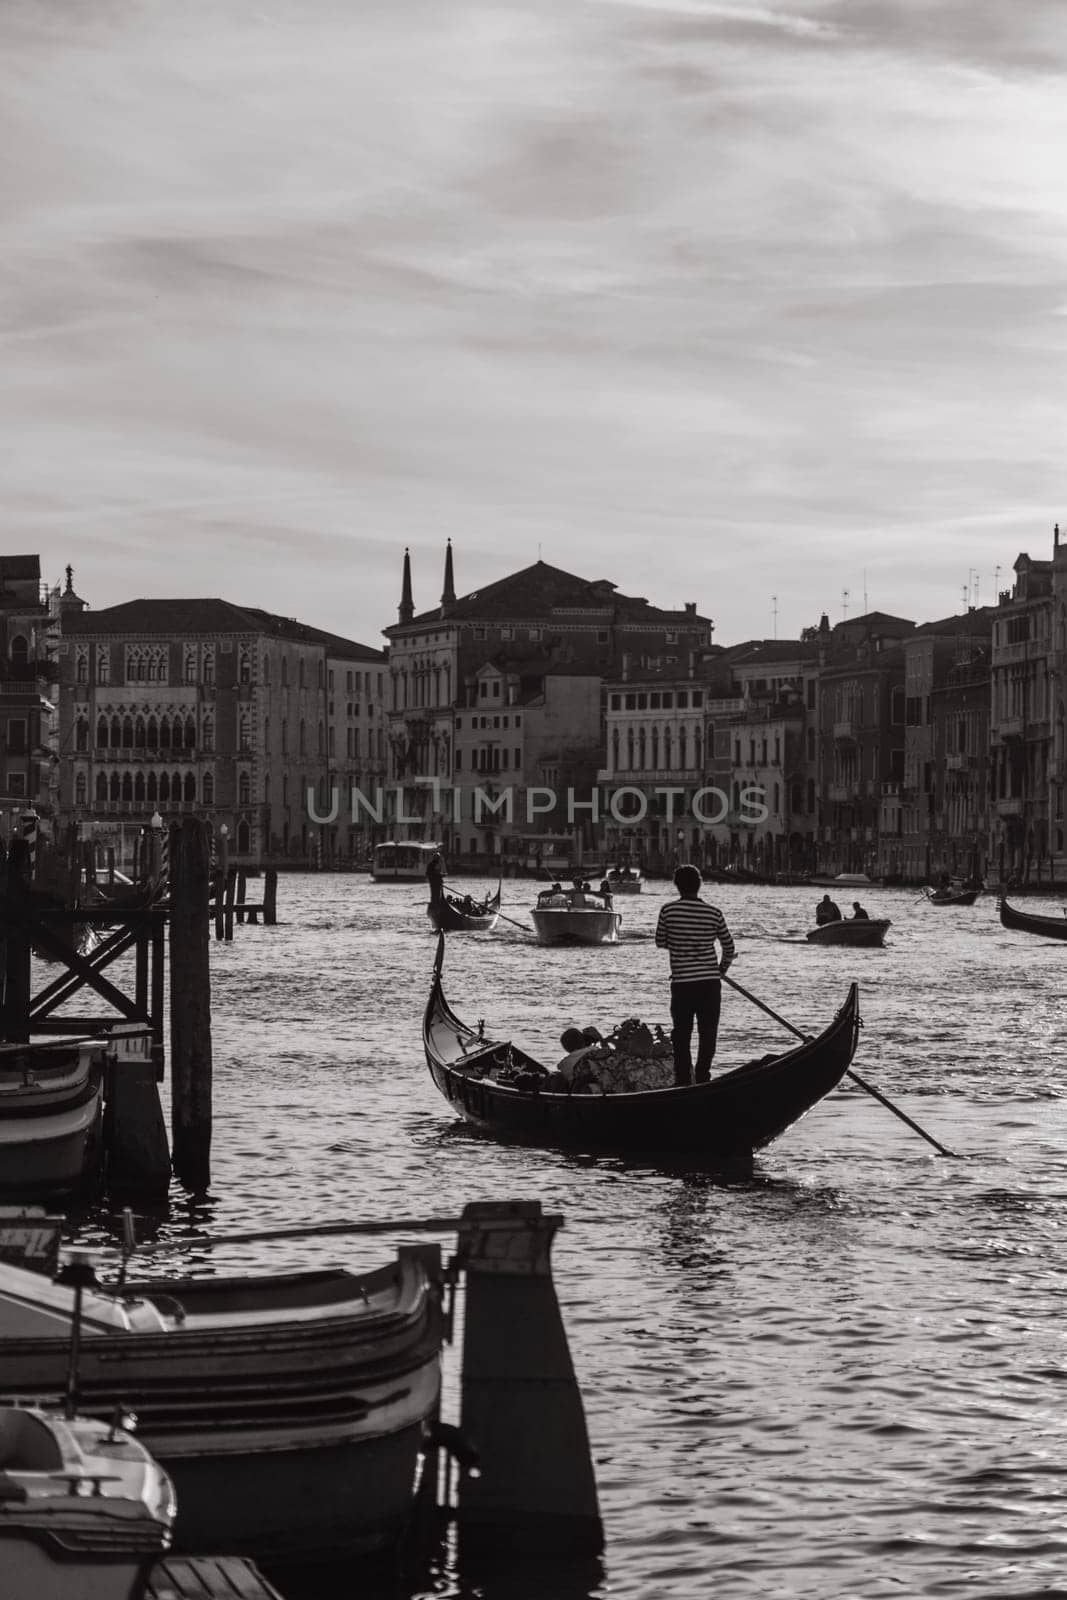 29 SEPTEMBER 2021, FLORENCIA, ITALY: Romantic black and white photo of tourists sitting in a gondola with a gondolier floating down a canal in Venice on warm summer evening